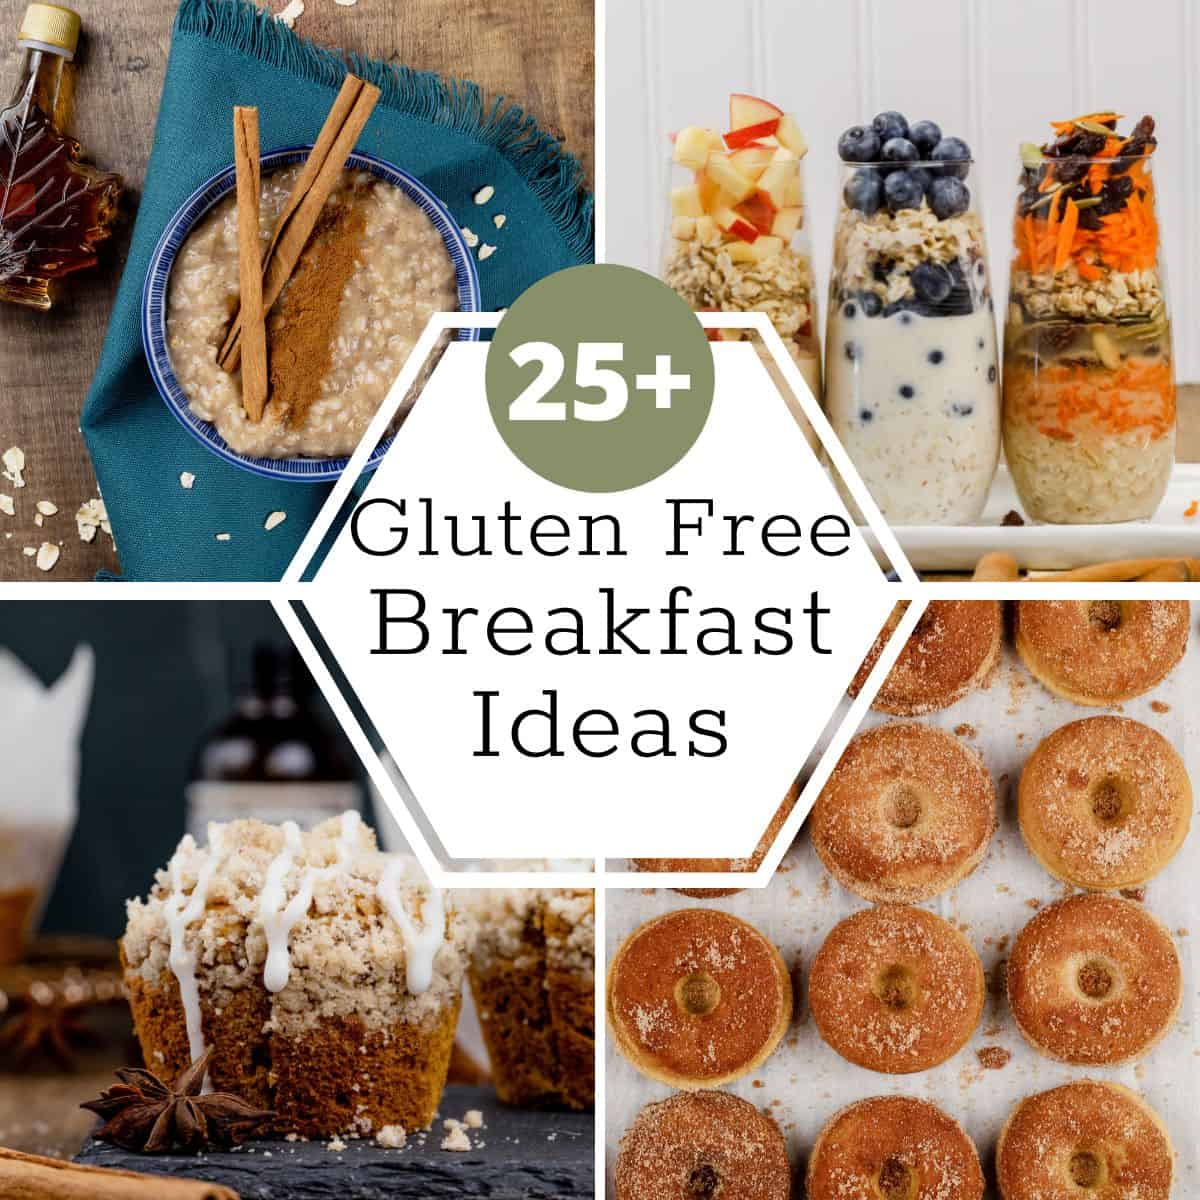 collage of 4 photos of different gluten free breakfasts, like donuts, cinnamon oatmeal, and muffins. a white text box reads, "25+ gluten free breakfast ideas".